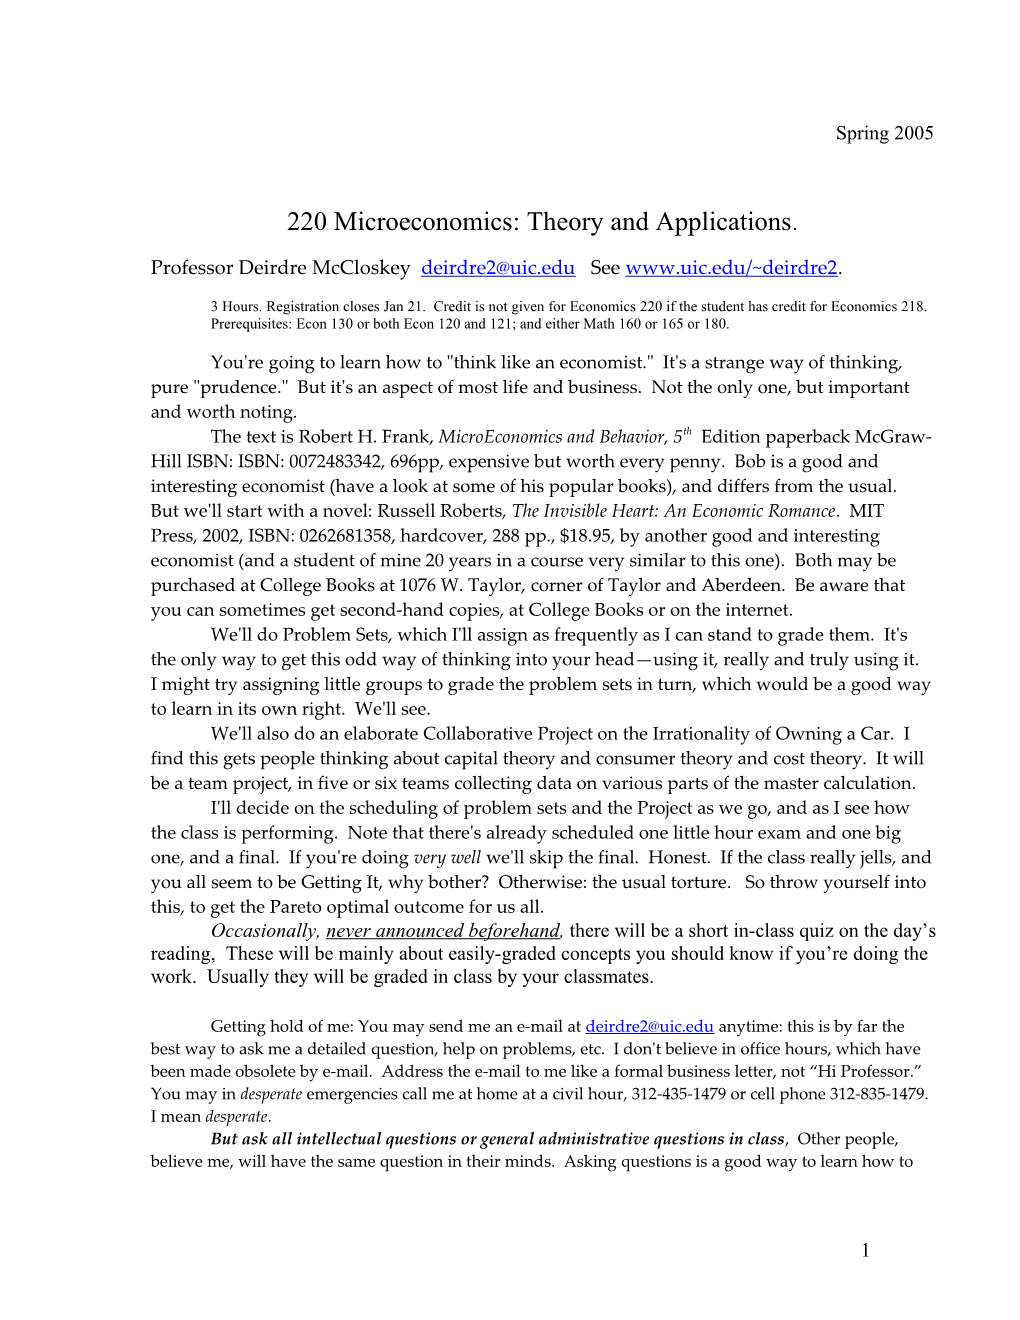 220 Microeconomics: Theory and Applications